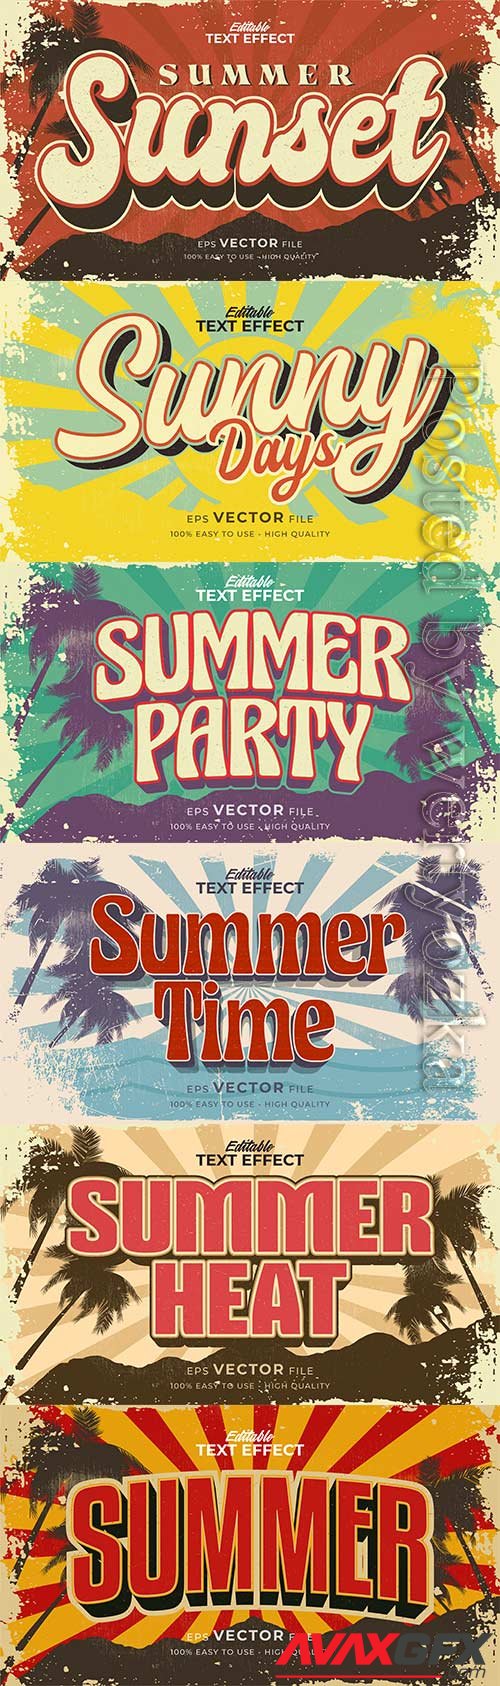 Retro summer holiday text in grunge style theme in vector vol 5